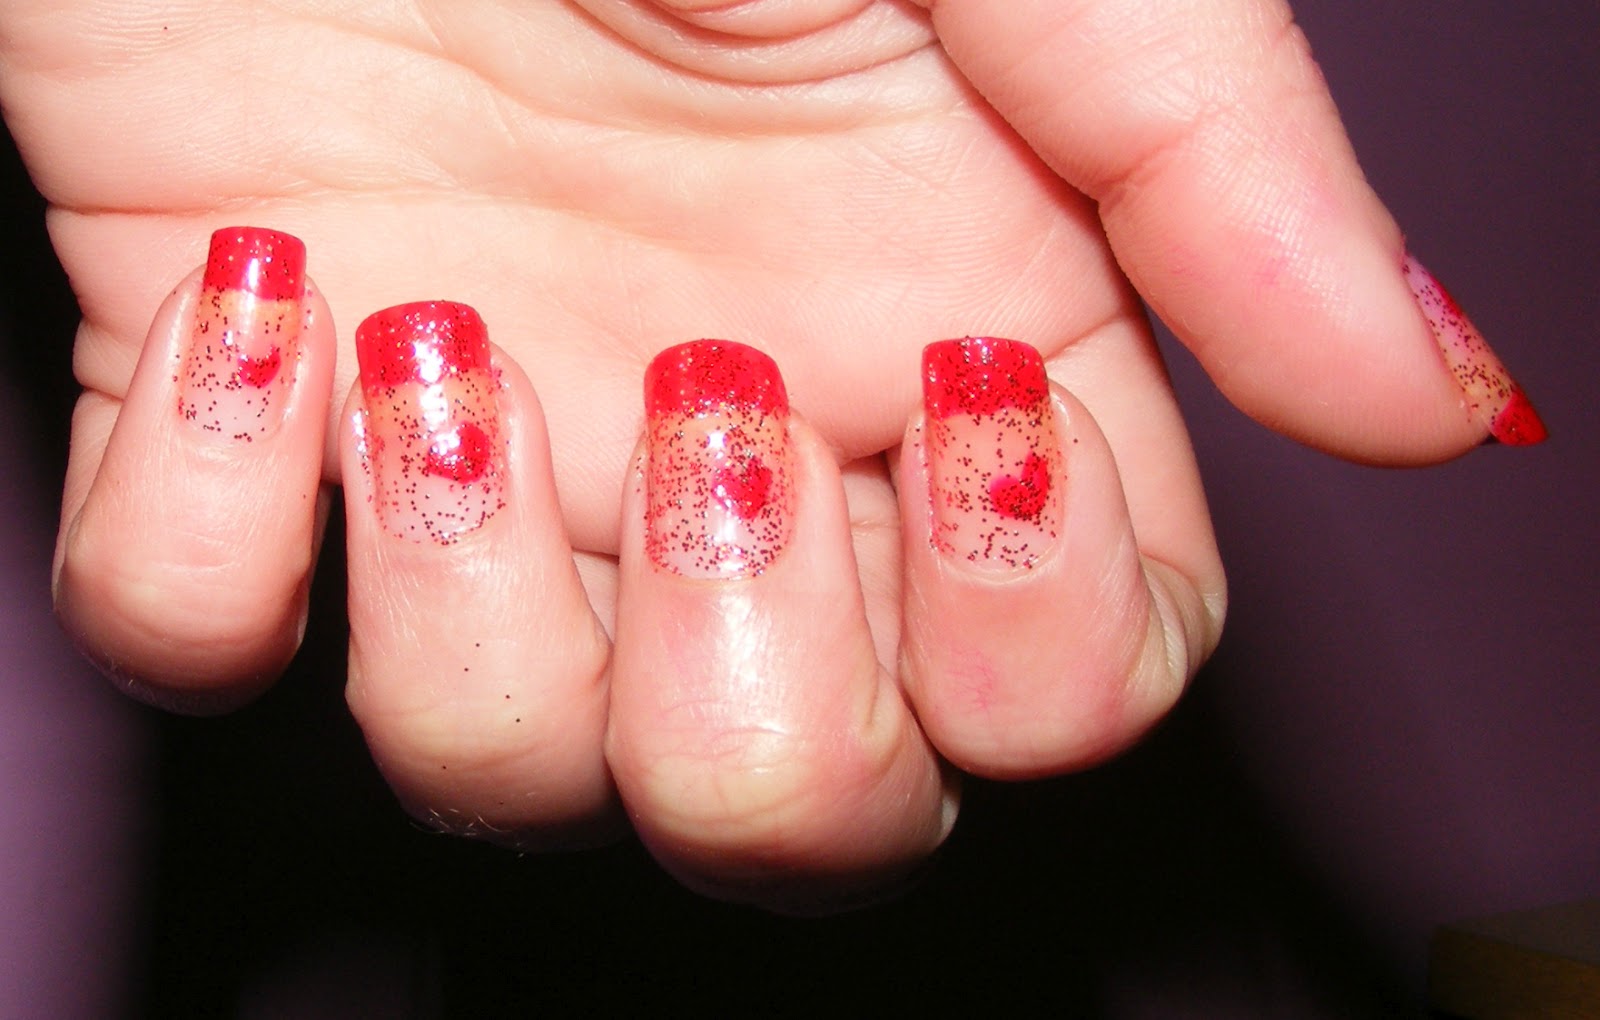 Nails Of The Day (NOTD): Valentine’s Day nail art